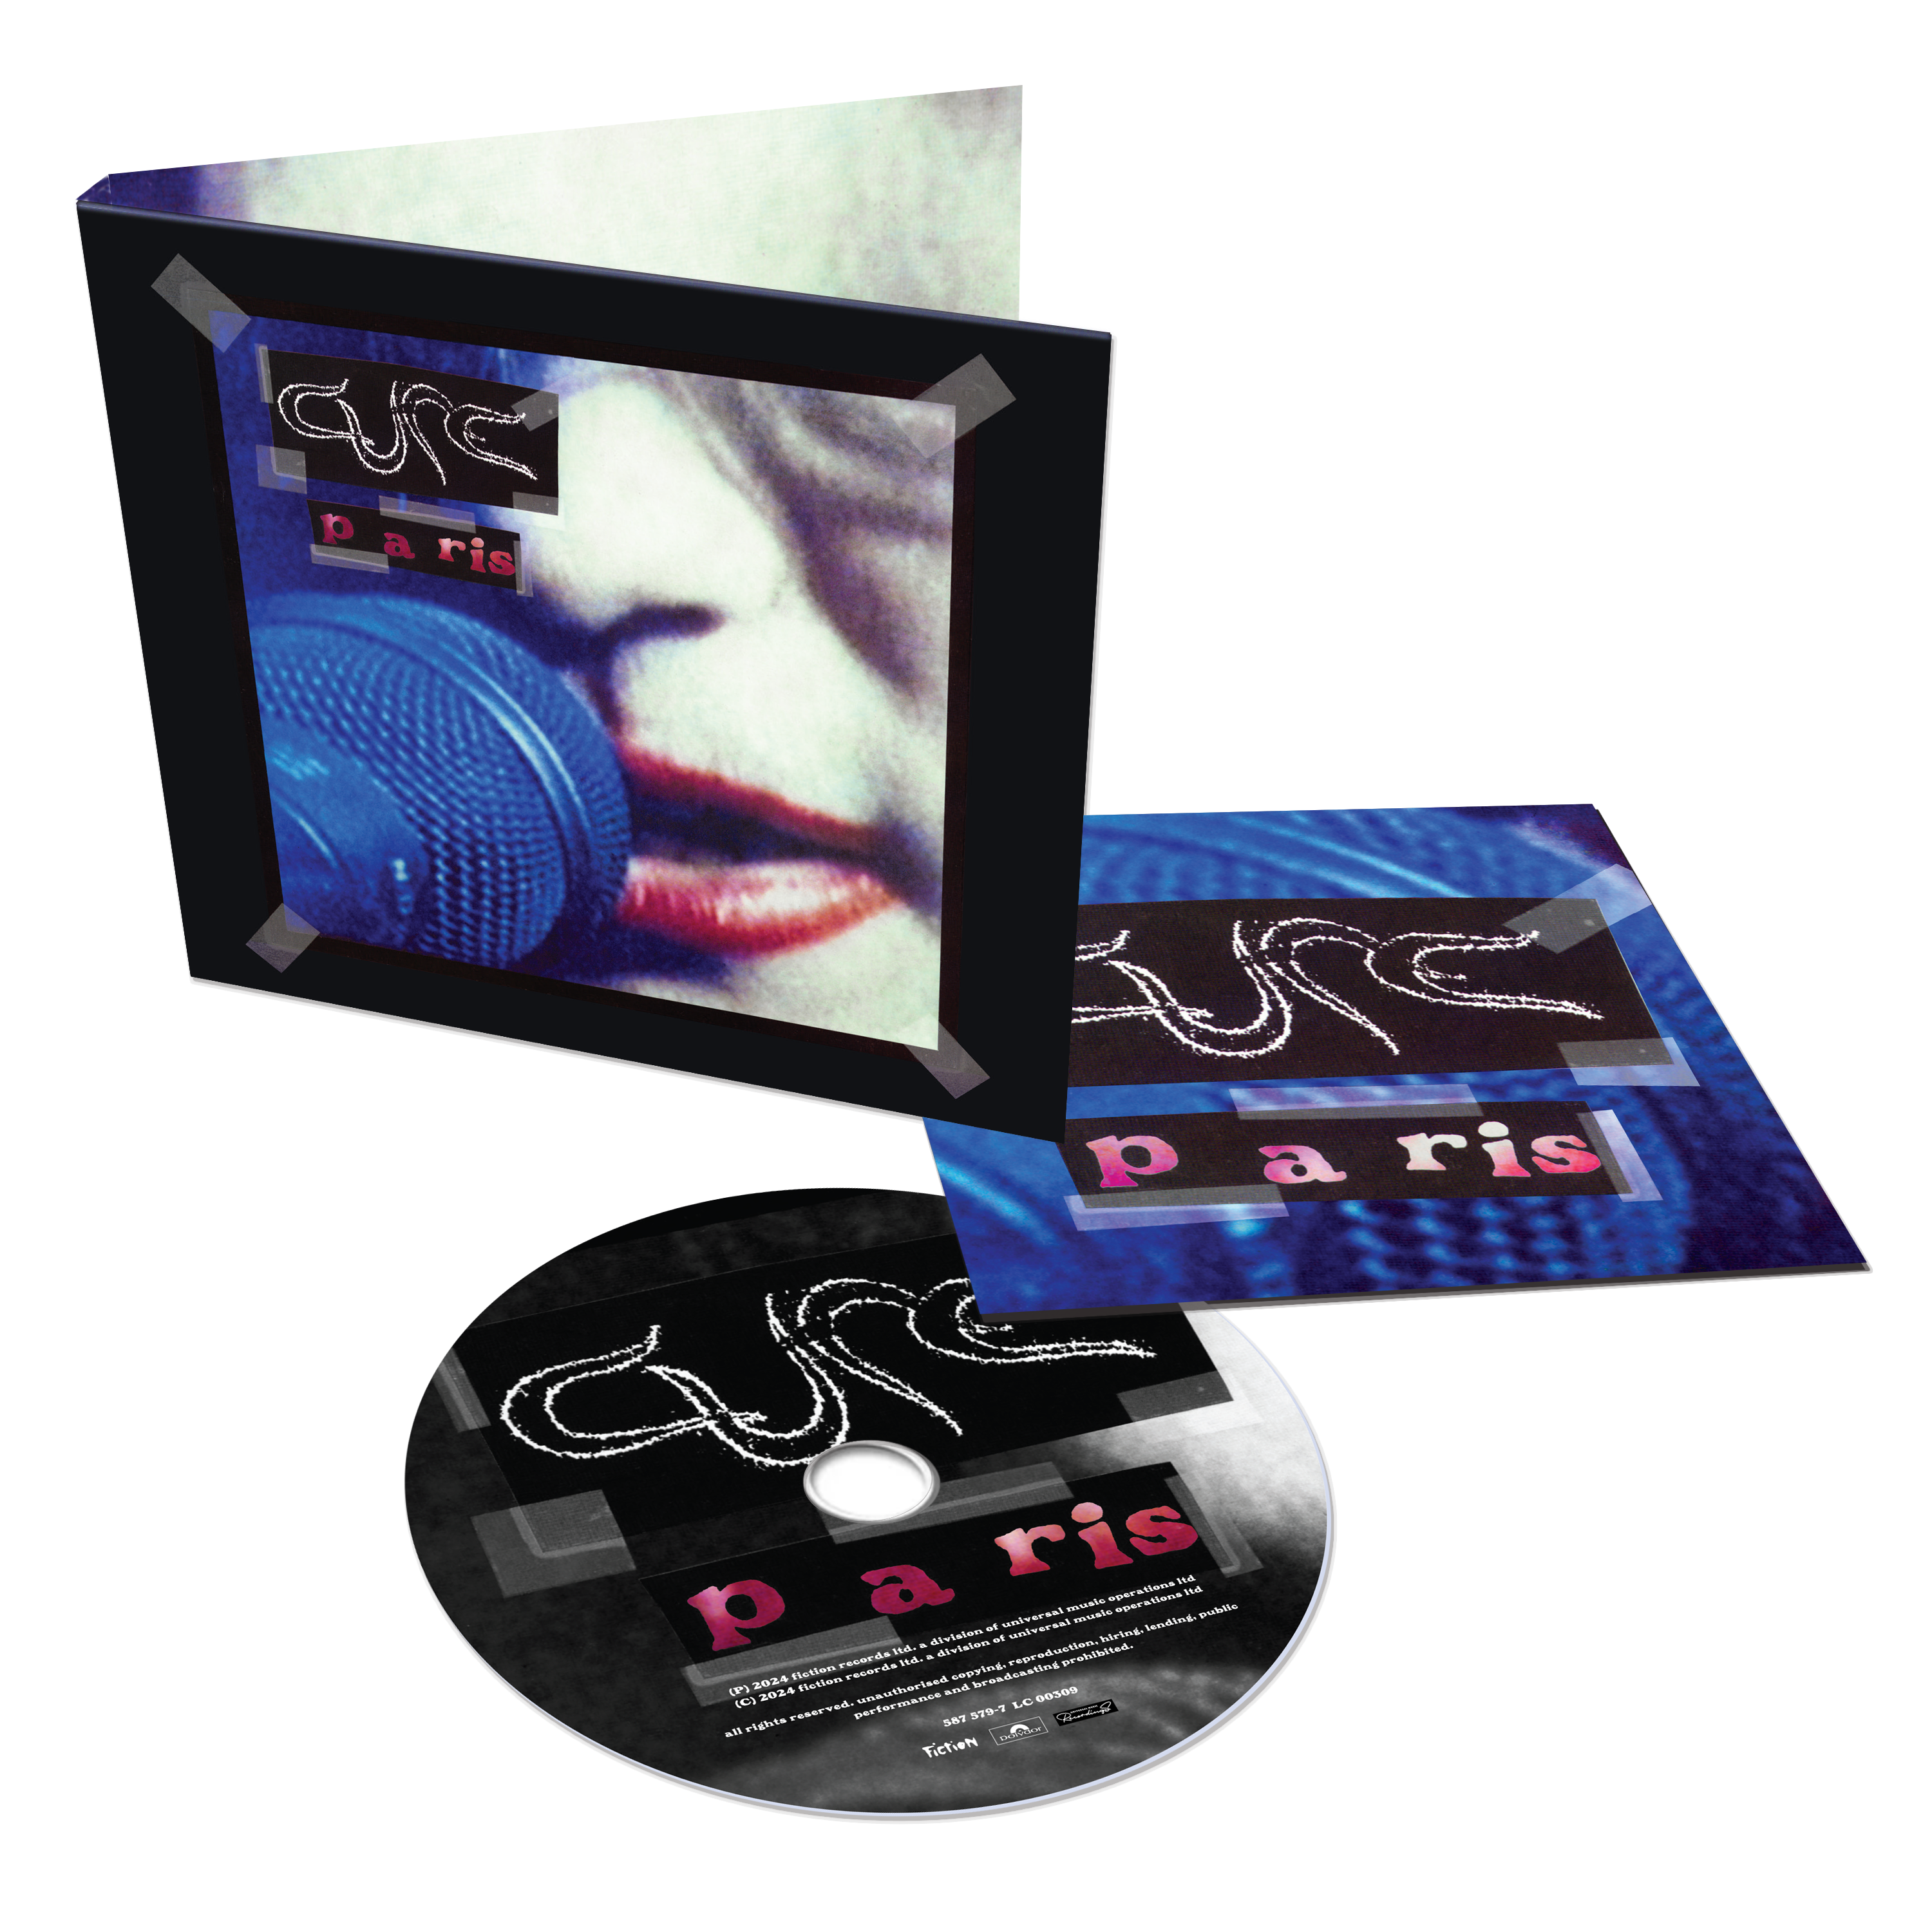 The Cure - Greatest Hits [DVD]